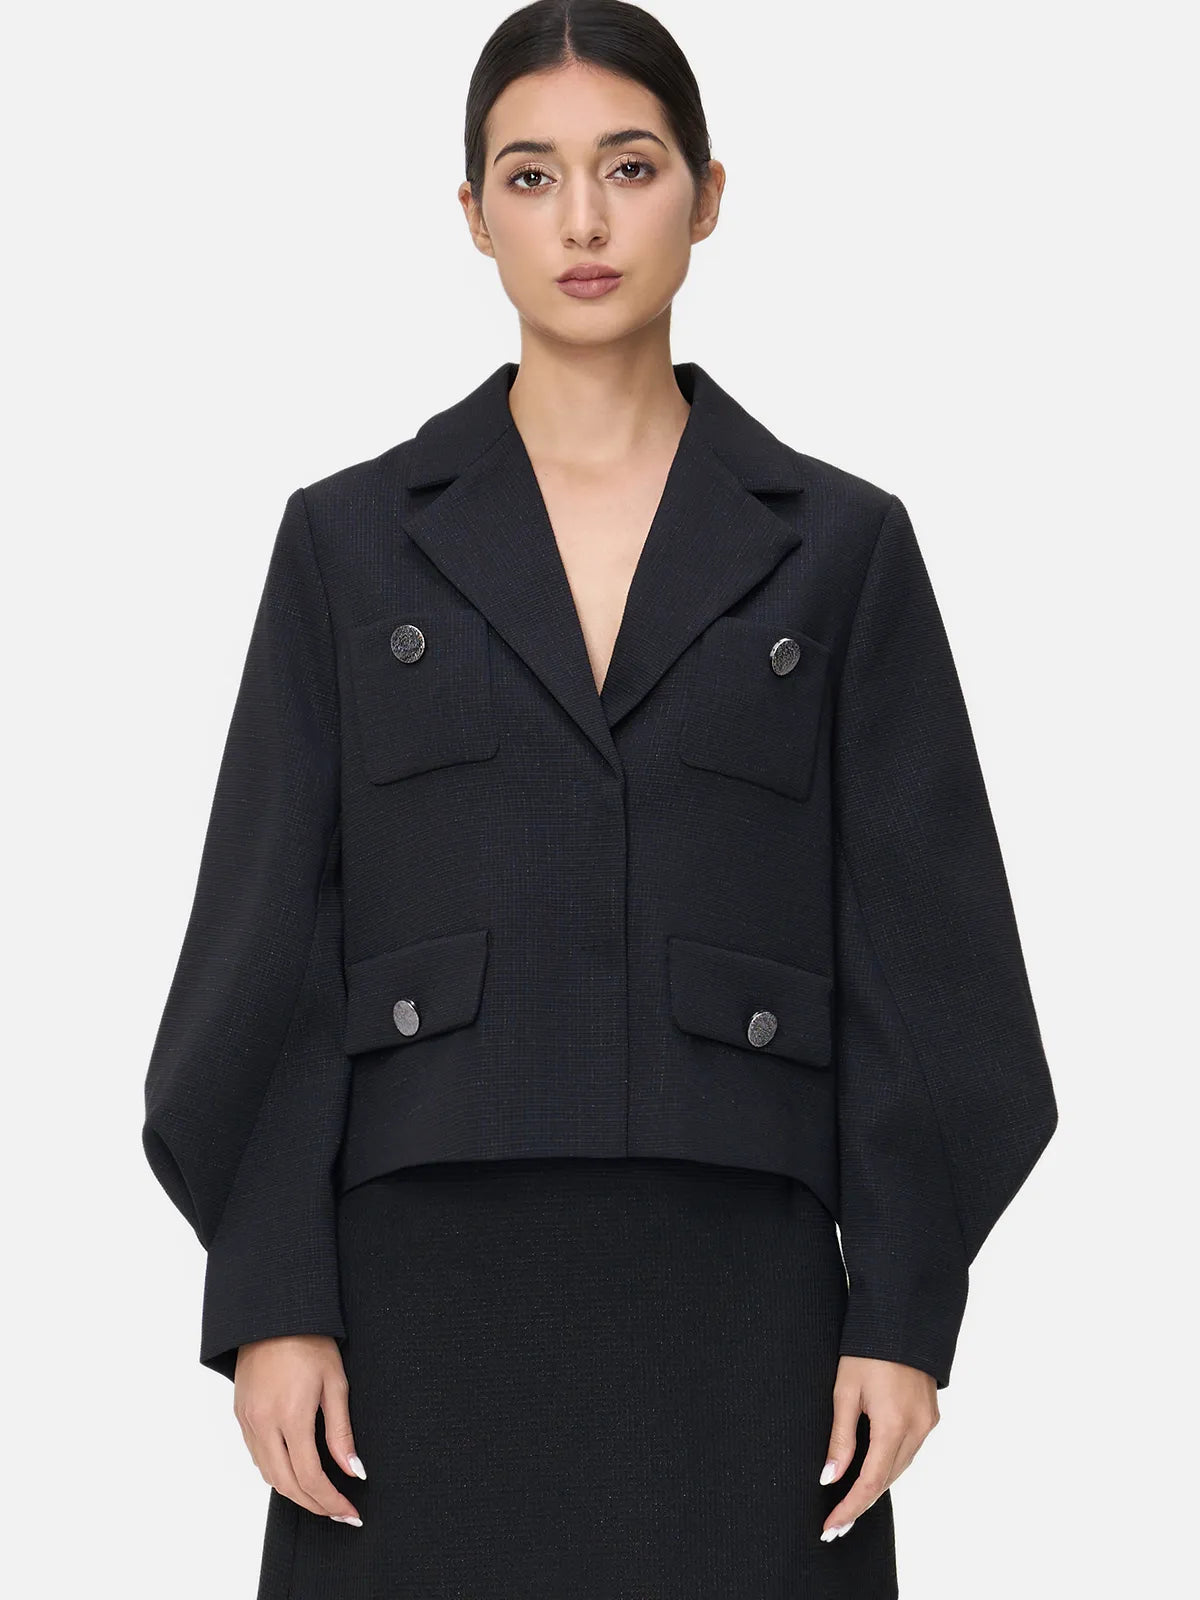 Elevate your style with this chic black coat, featuring a lapel V-neck and lantern sleeves for a sophisticated and unique look.